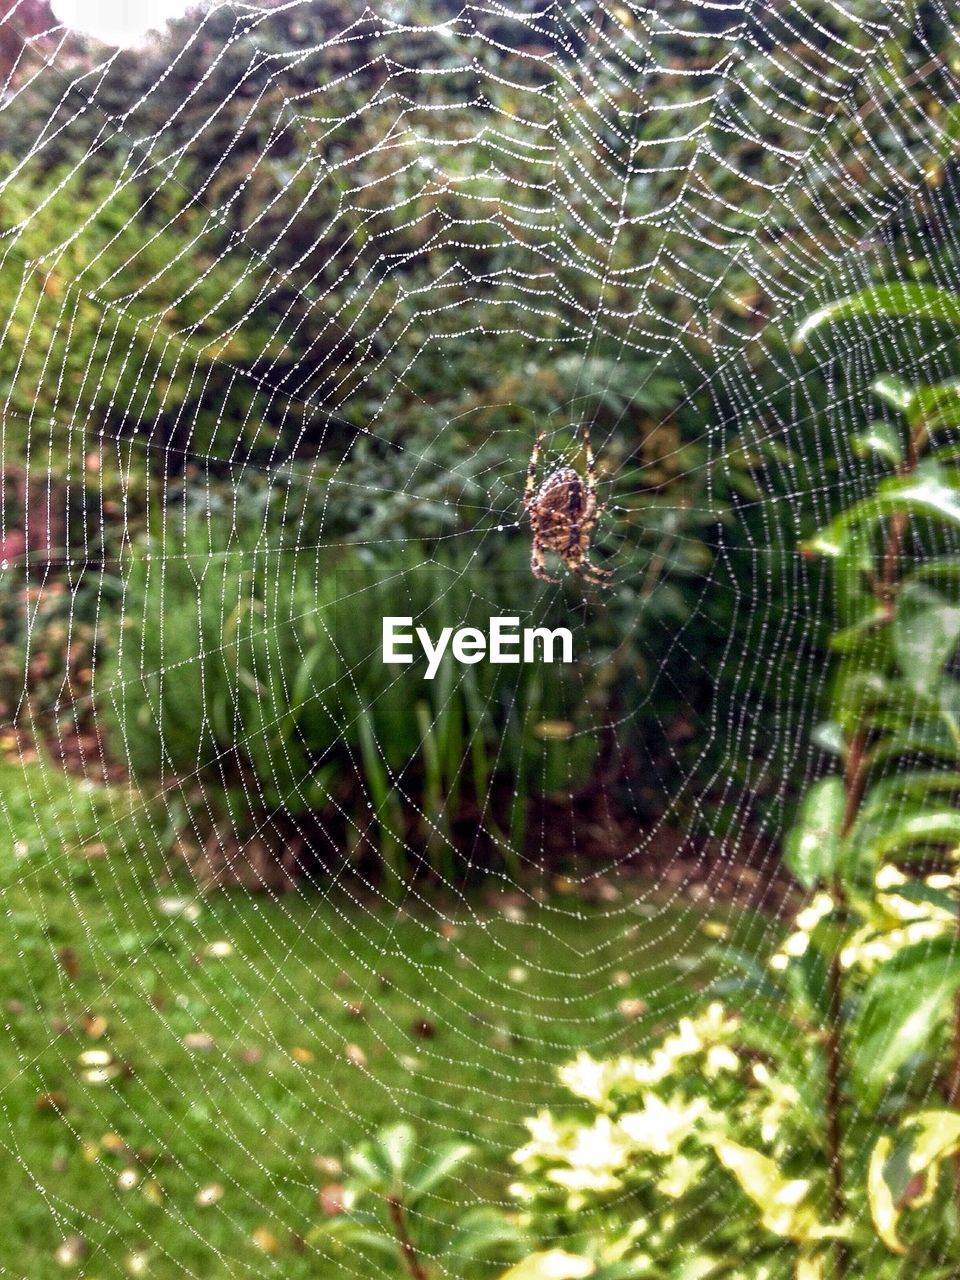 CLOSE-UP OF SPIDER ON WEB AGAINST BLURRED BACKGROUND